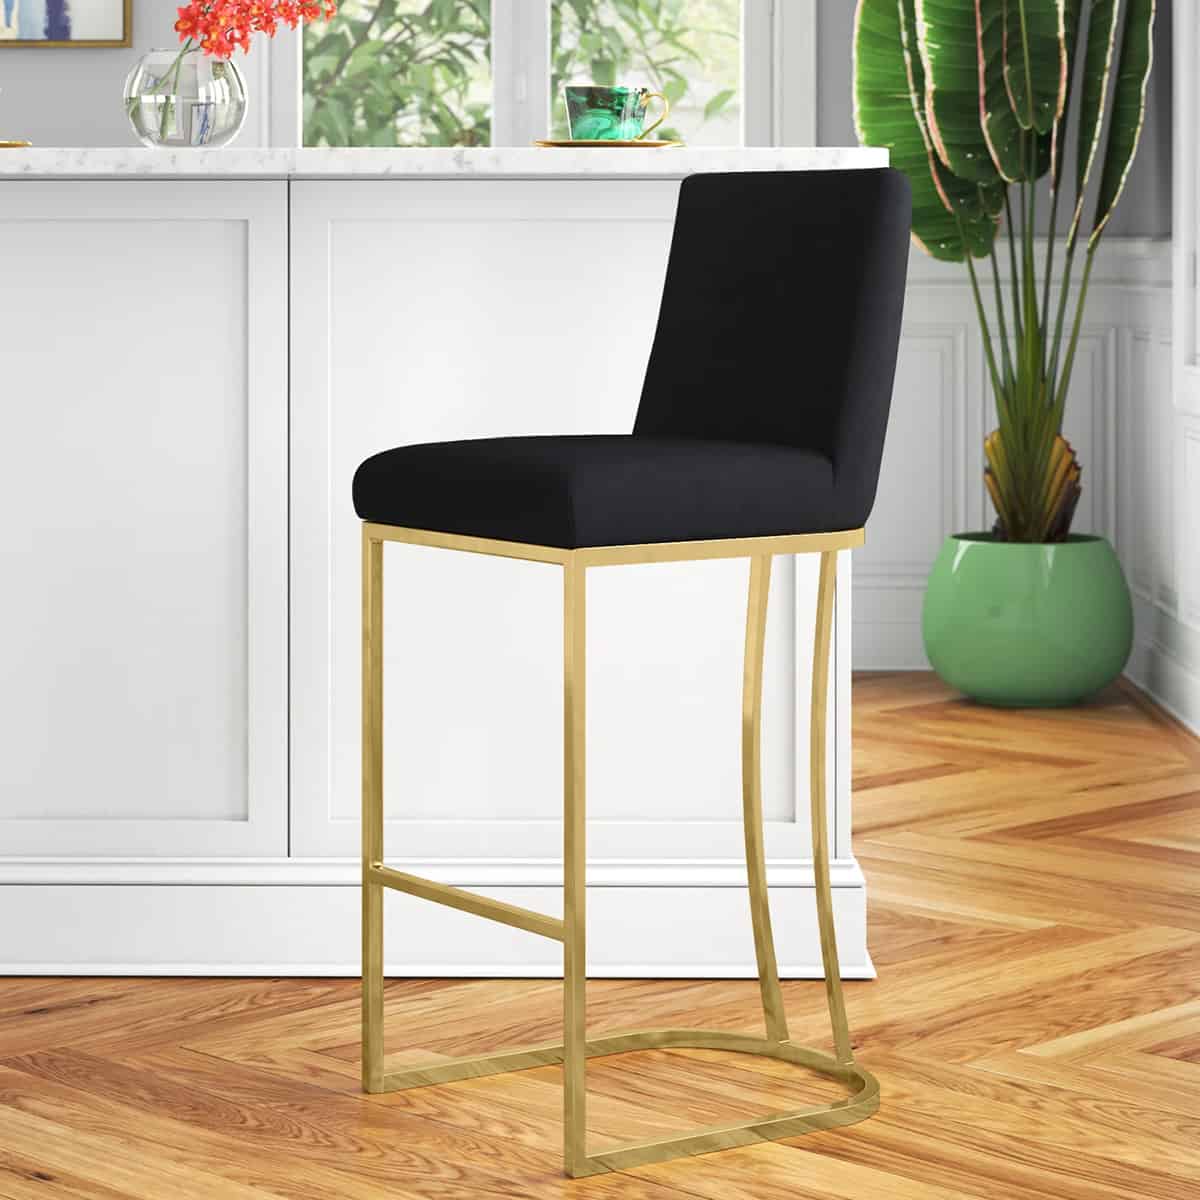 Black bar stool with a square back and gold trim.